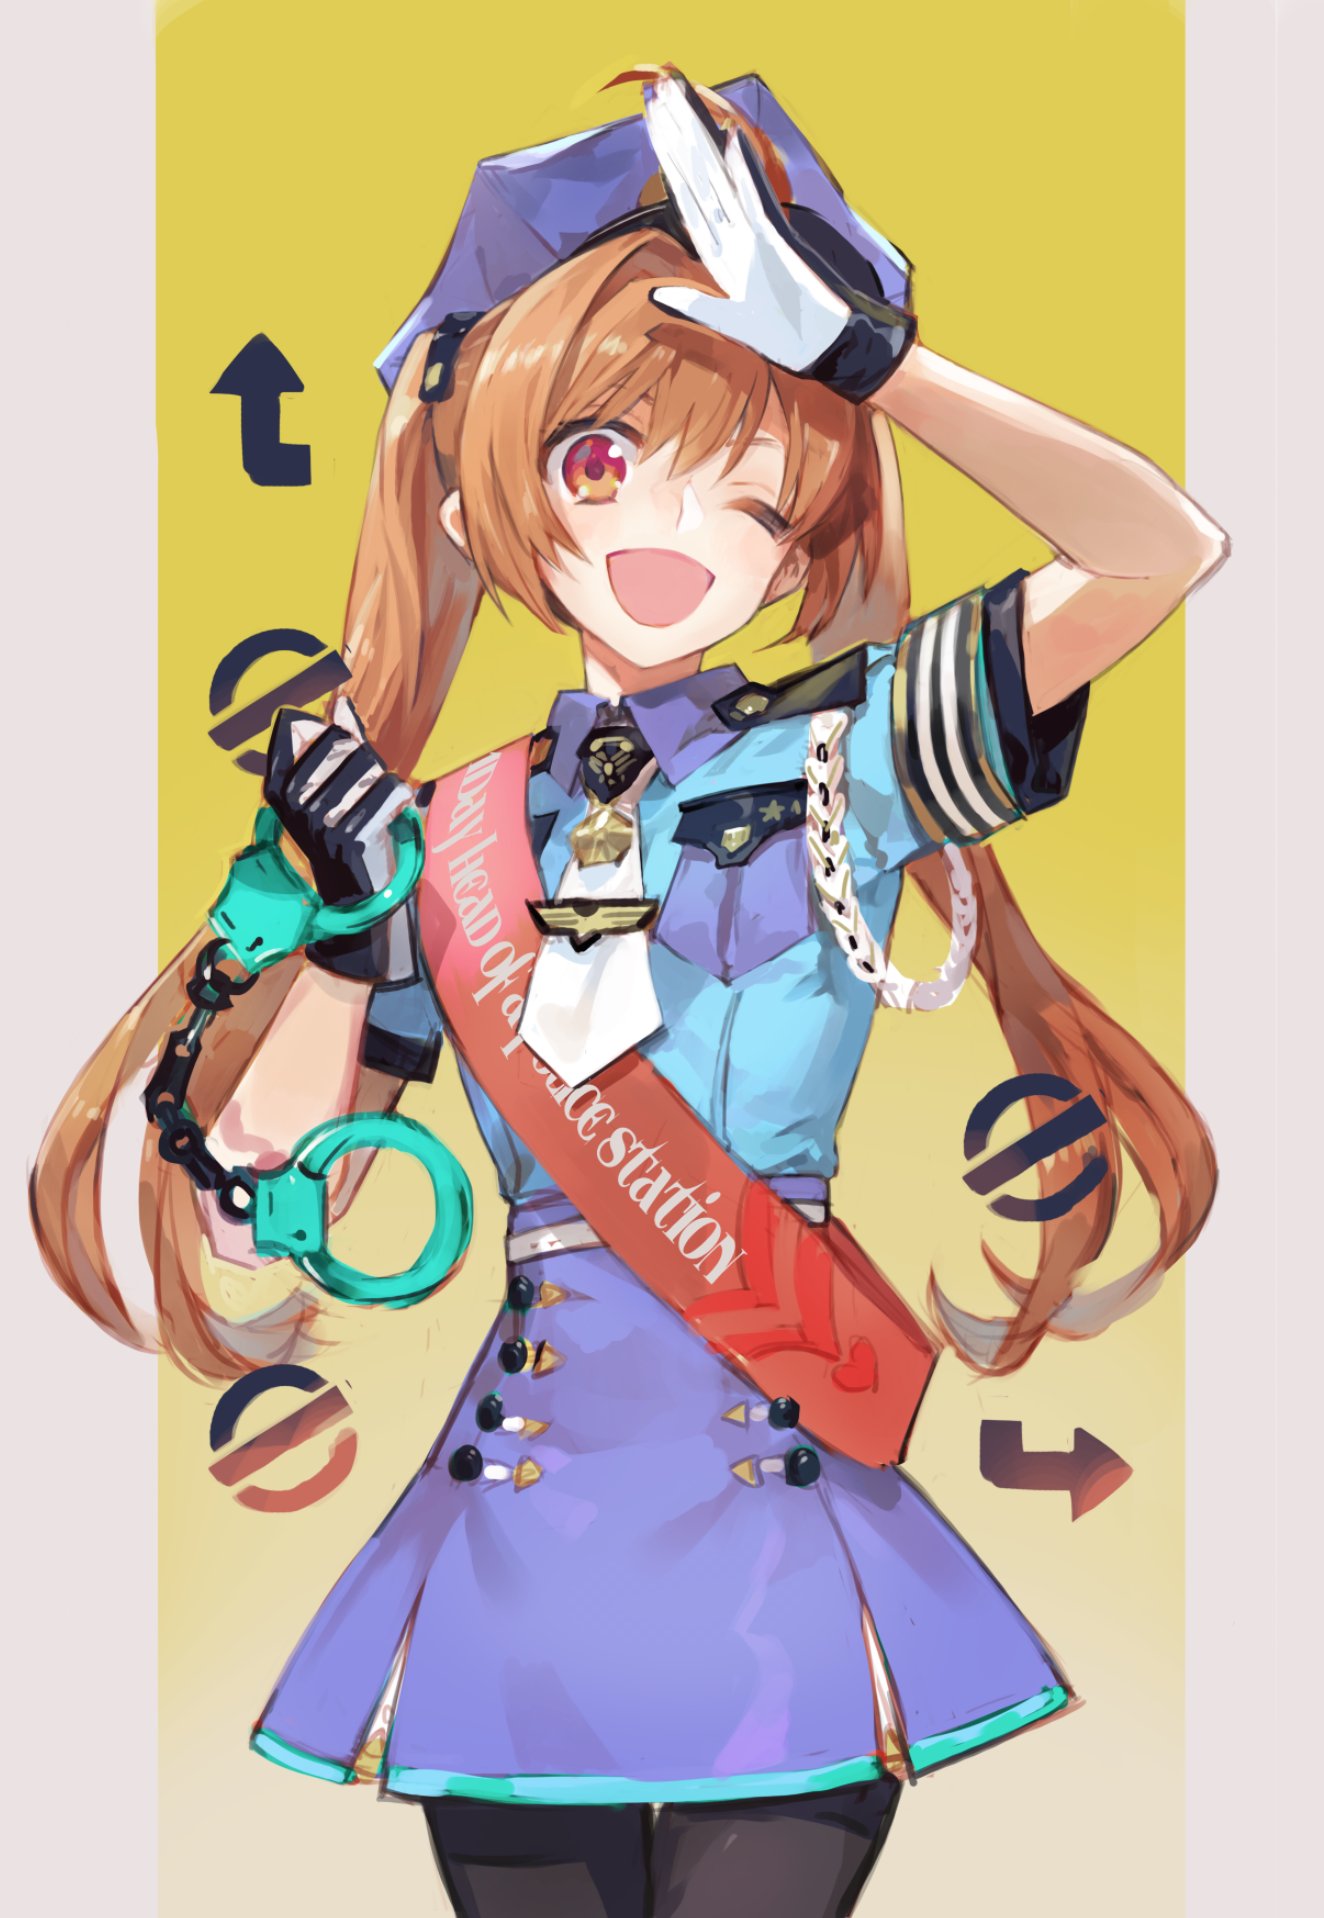 1girl ;d aiguillette alternate_costume alternate_headwear badge brown_hair buttons cuffs eiyuu_densetsu estelle_bright gloves handcuffs hat highres long_hair necktie nishihara_isao one_eye_closed open_mouth police police_hat police_uniform policewoman red_eyes salute skirt smile solo sora_no_kiseki twintails uniform